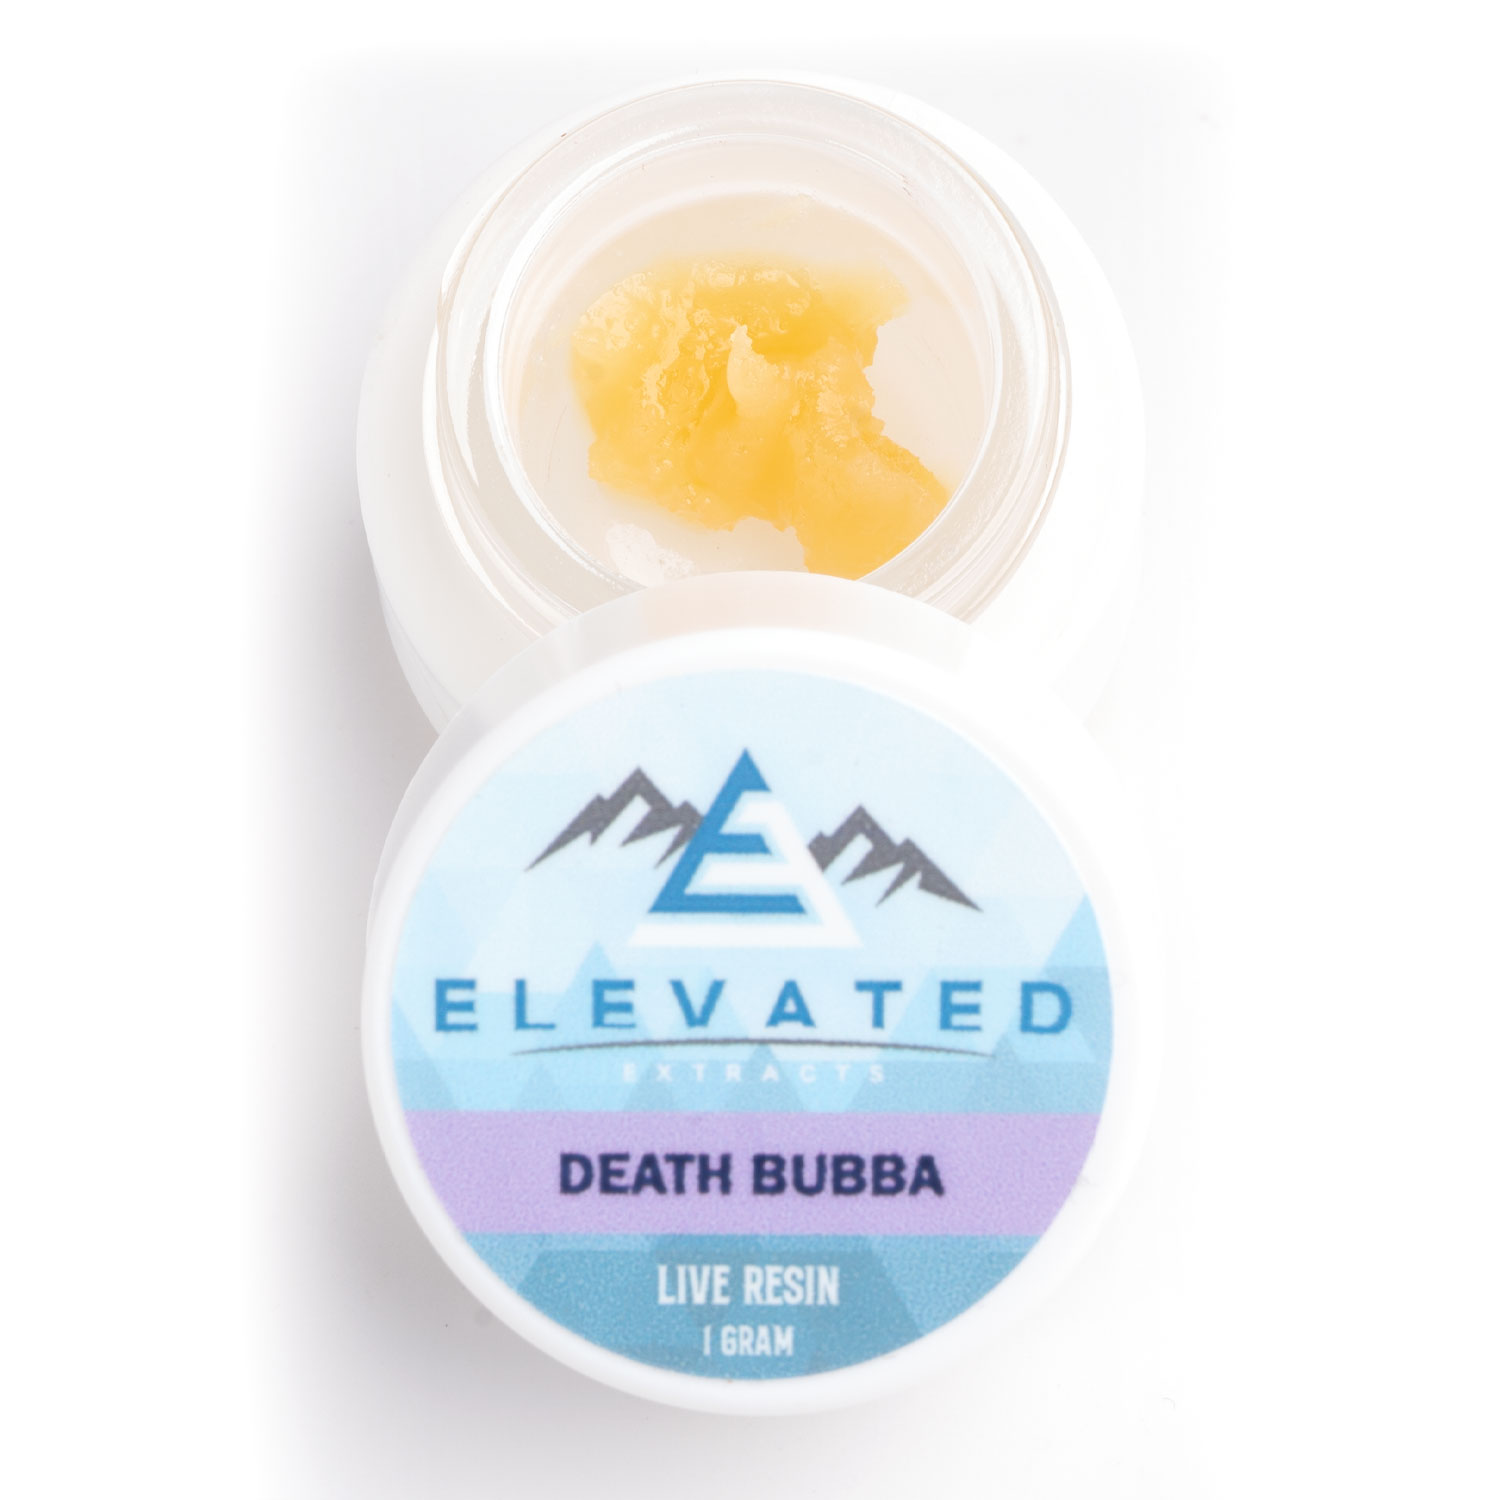 Elevated Extracts Live Resin